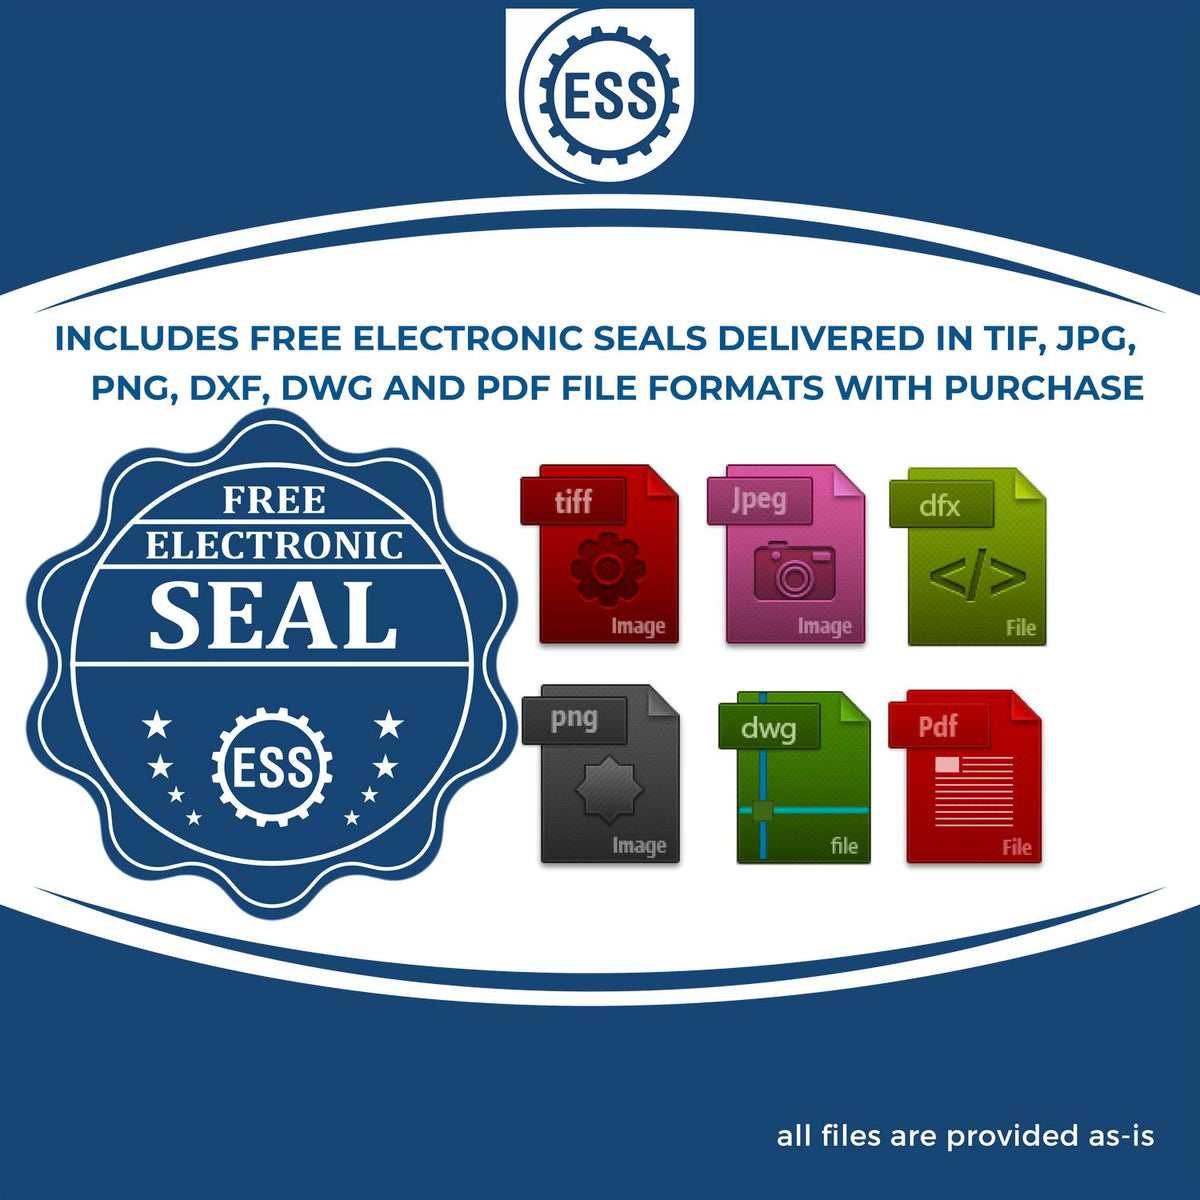 An infographic for the free electronic seal for the Hybrid North Dakota Engineer Seal illustrating the different file type icons such as DXF, DWG, TIF, JPG and PNG.